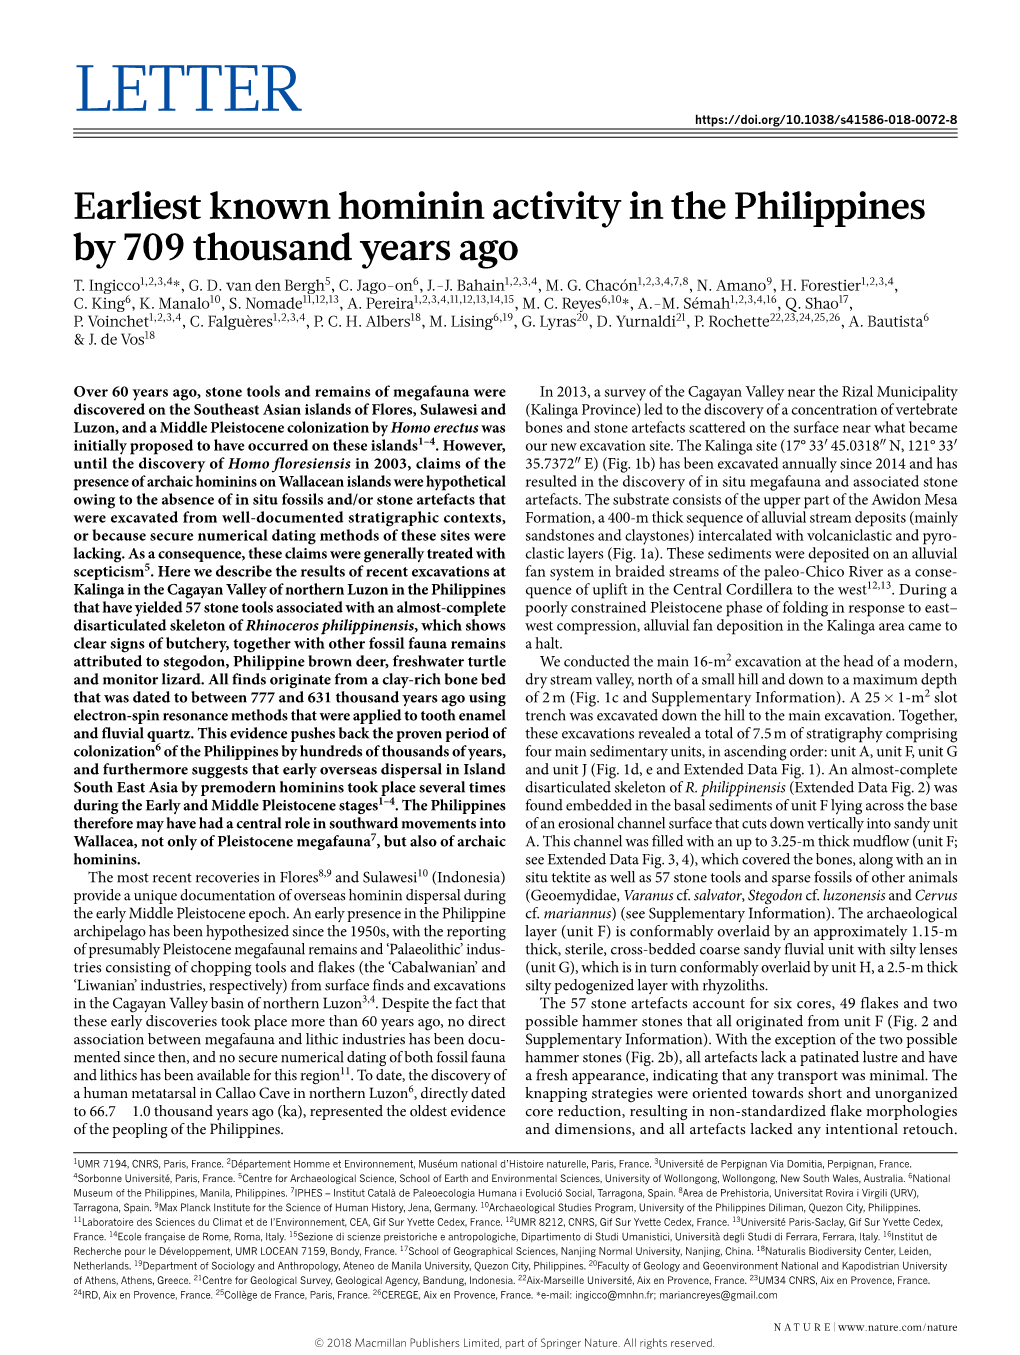 Earliest Known Hominin Activity in the Philippines by 709 Thousand Years Ago T